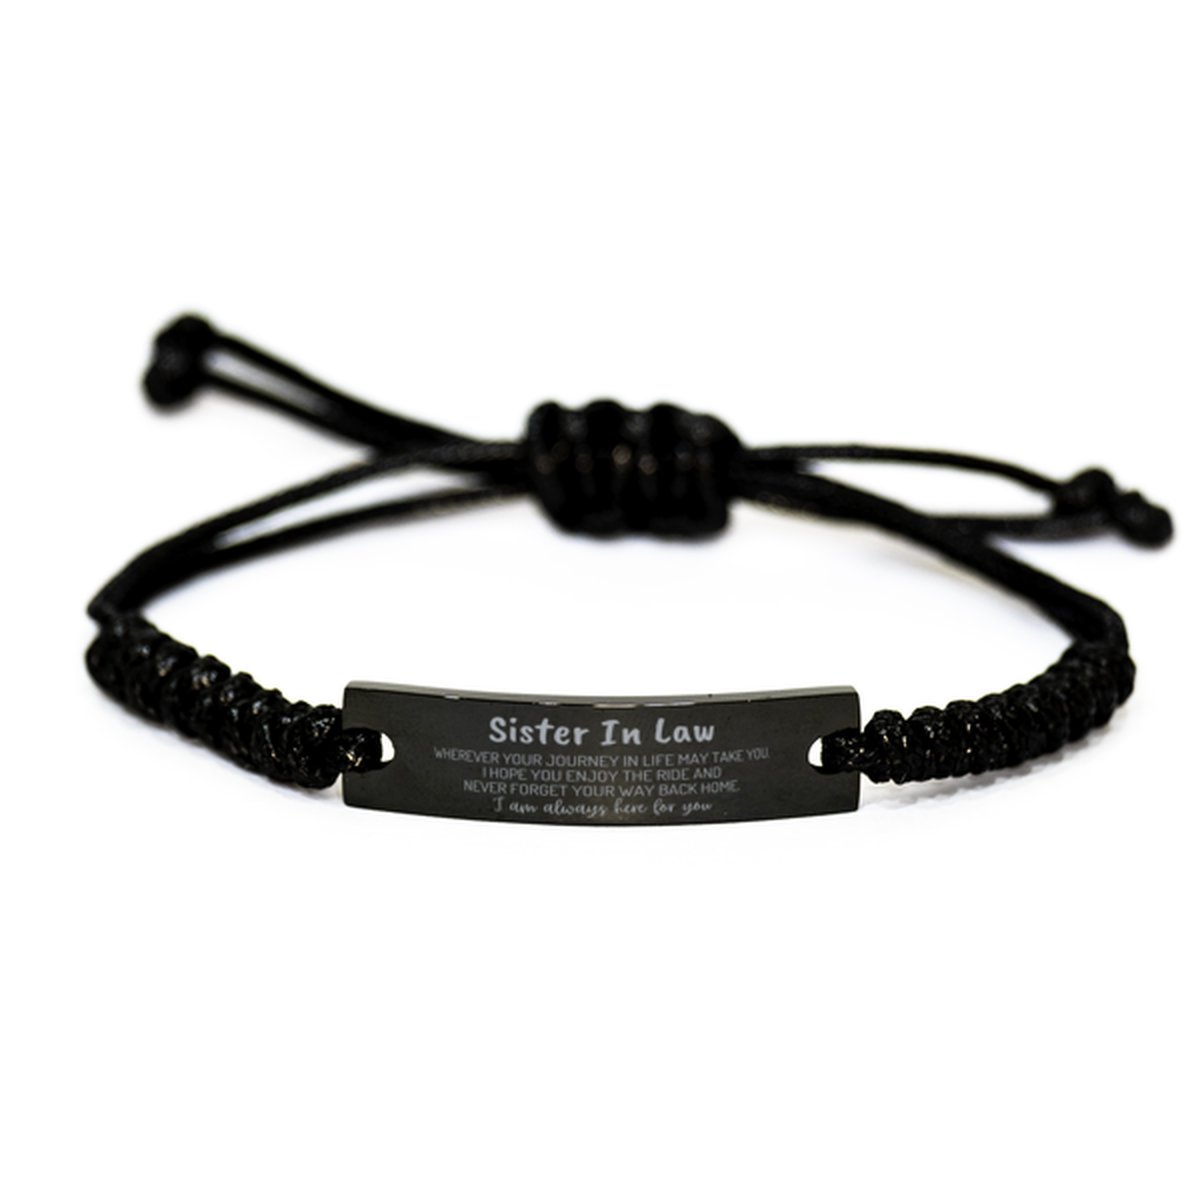 Sister In Law wherever your journey in life may take you, I am always here for you Sister In Law Black Rope Bracelet, Awesome Christmas Gifts For Sister In Law, Sister In Law Birthday Gifts for Men Women Family Loved One